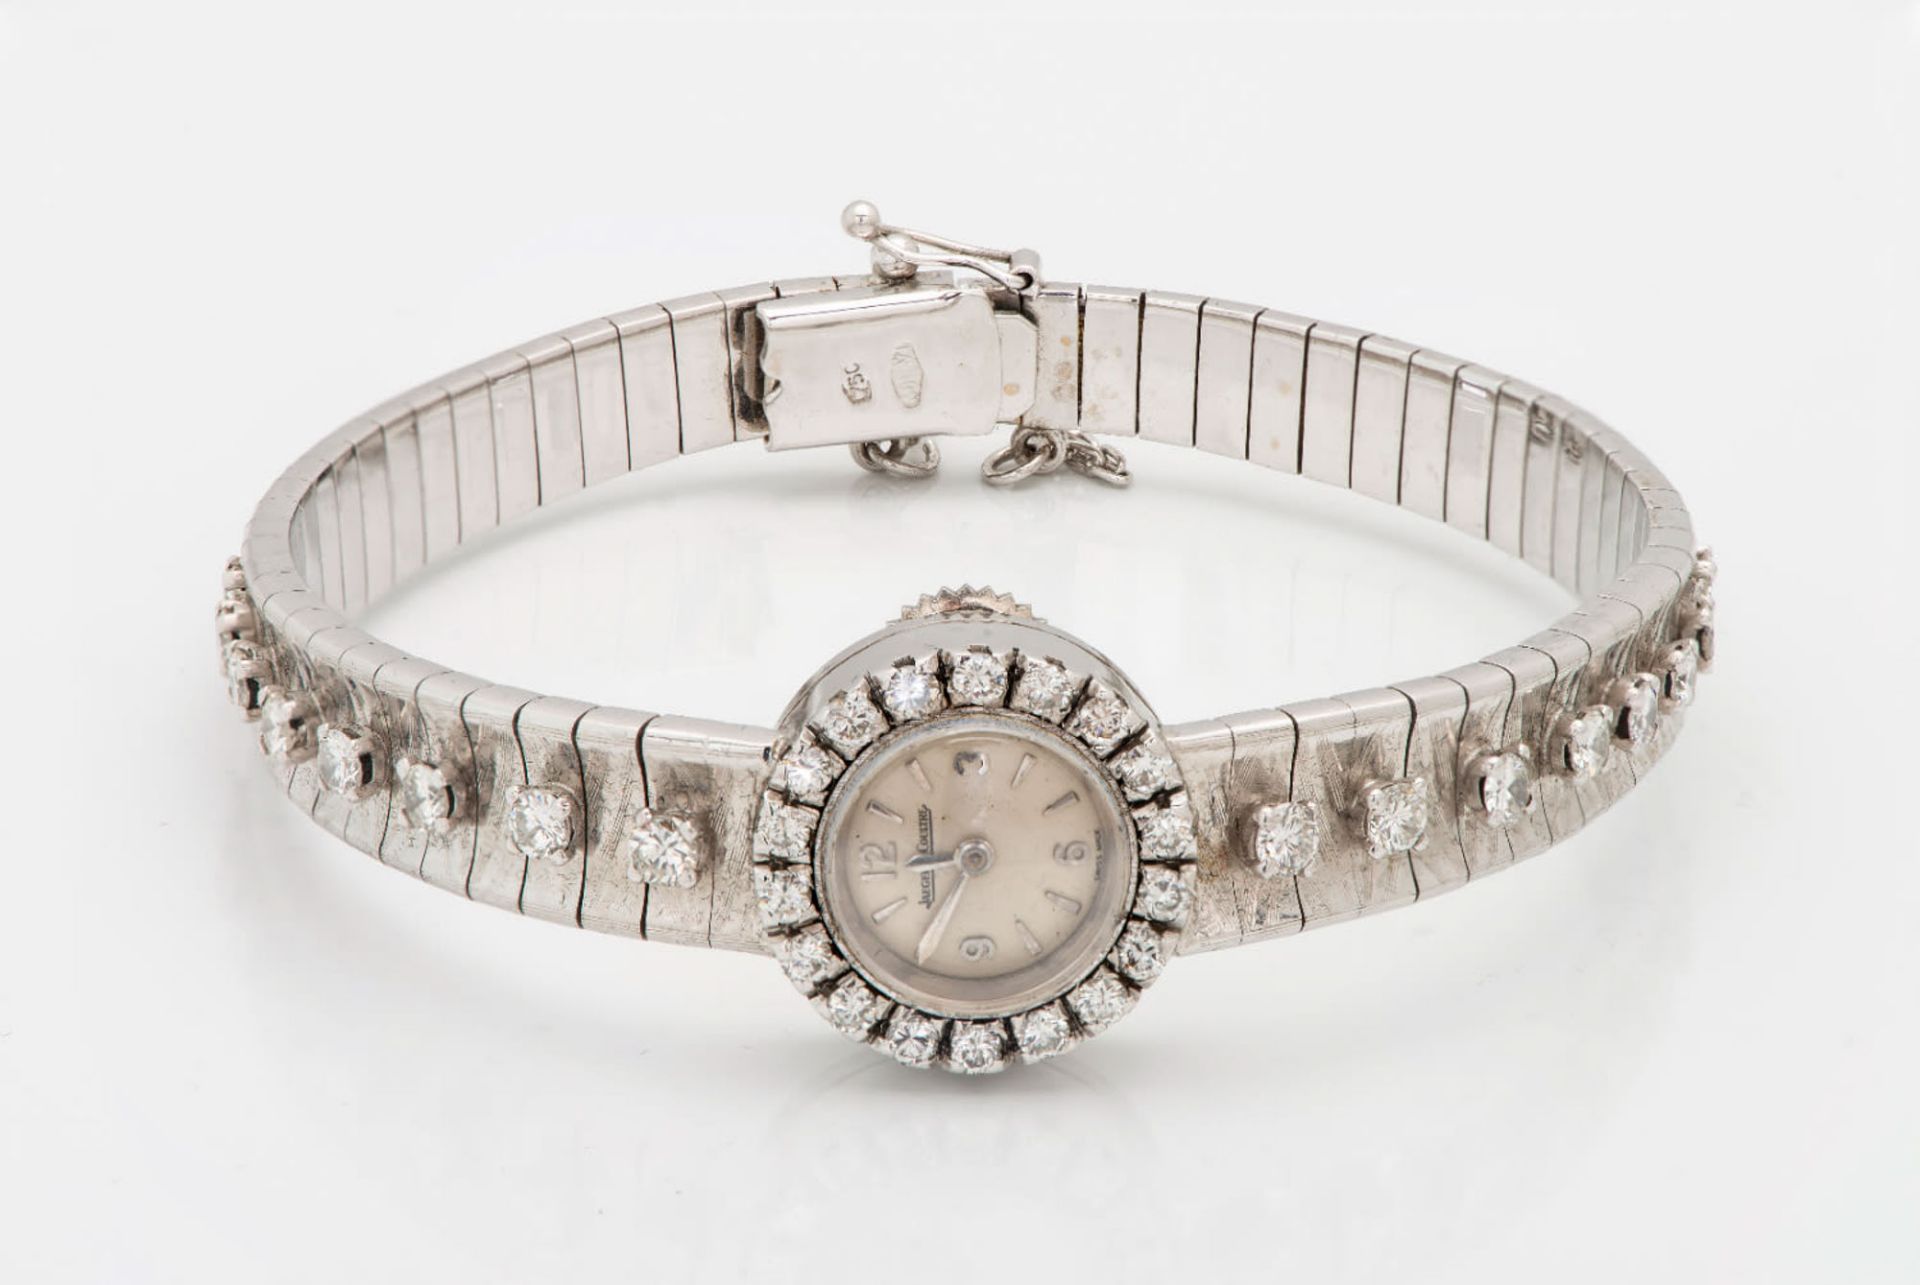 A Vintage Jaeger-LeCoultre 18K White Gold and Diamond Ladies Watch Bracelet - Image 2 of 3